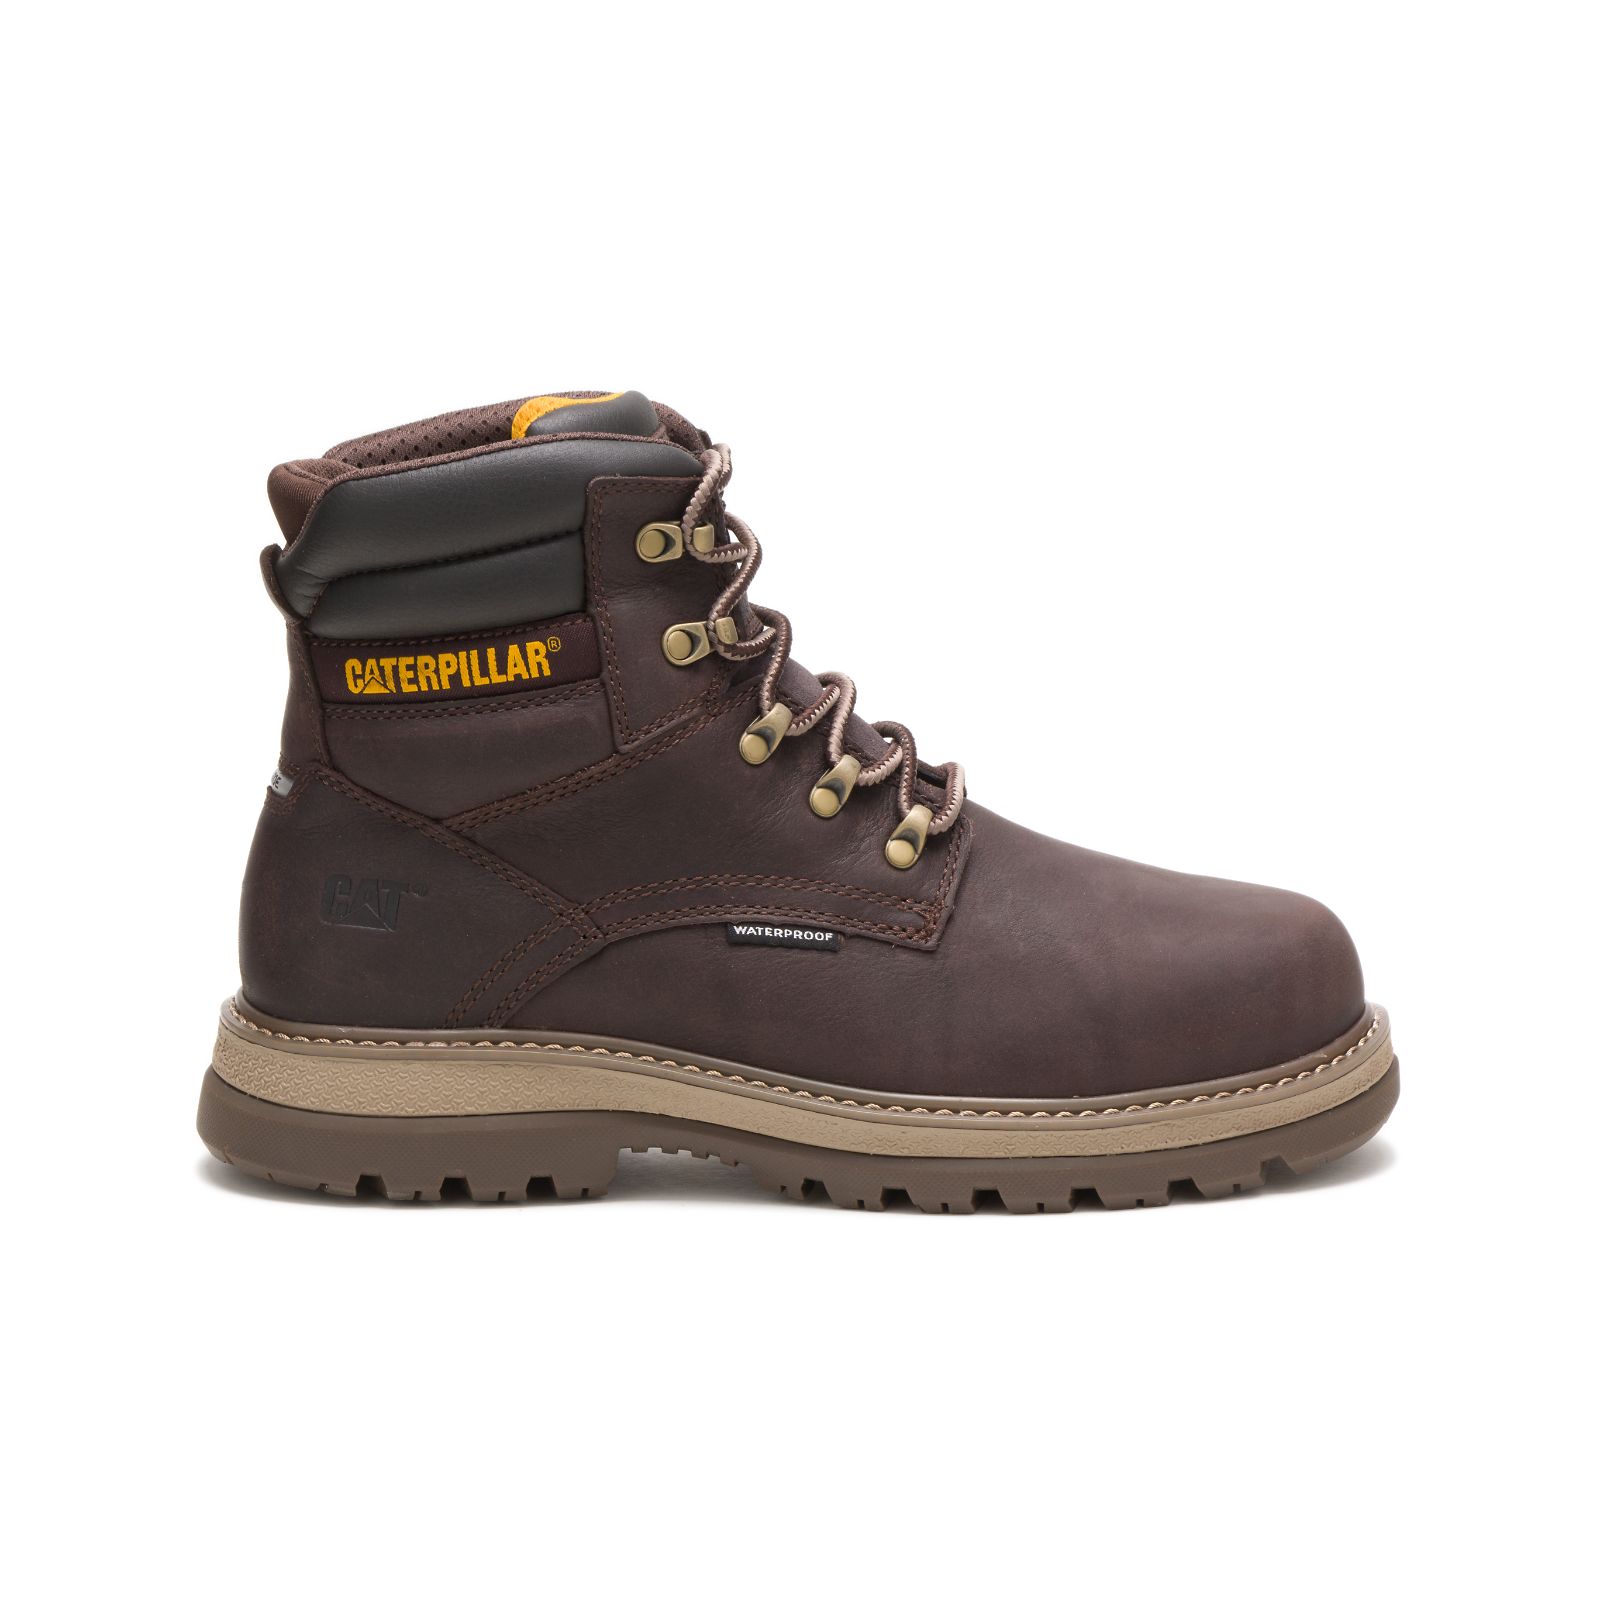 Caterpillar Shoes Factory Outlet - Caterpillar Shoes For